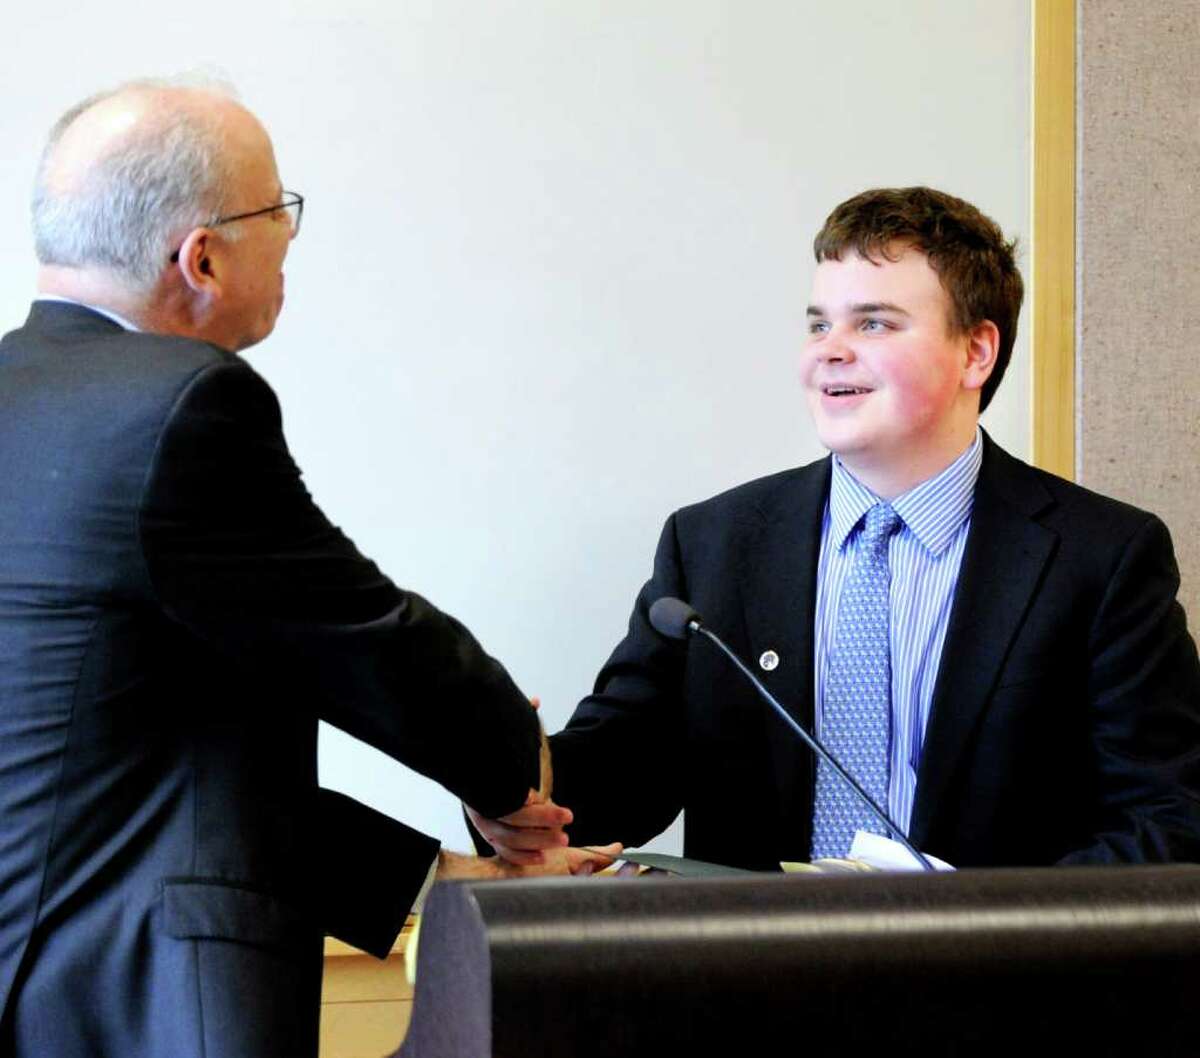 Greenwich Time editor David McCumber, shakes hands with Greenwich High School junior William Hallisey, who was named the first place winner of the second annual Defining Diversity Writing Contest. The award ceremony, sponsored by Greenwich Time and the Town of Greenwich, was held at Greenwich Library, Tuesday afternoon, May 17, 2011.